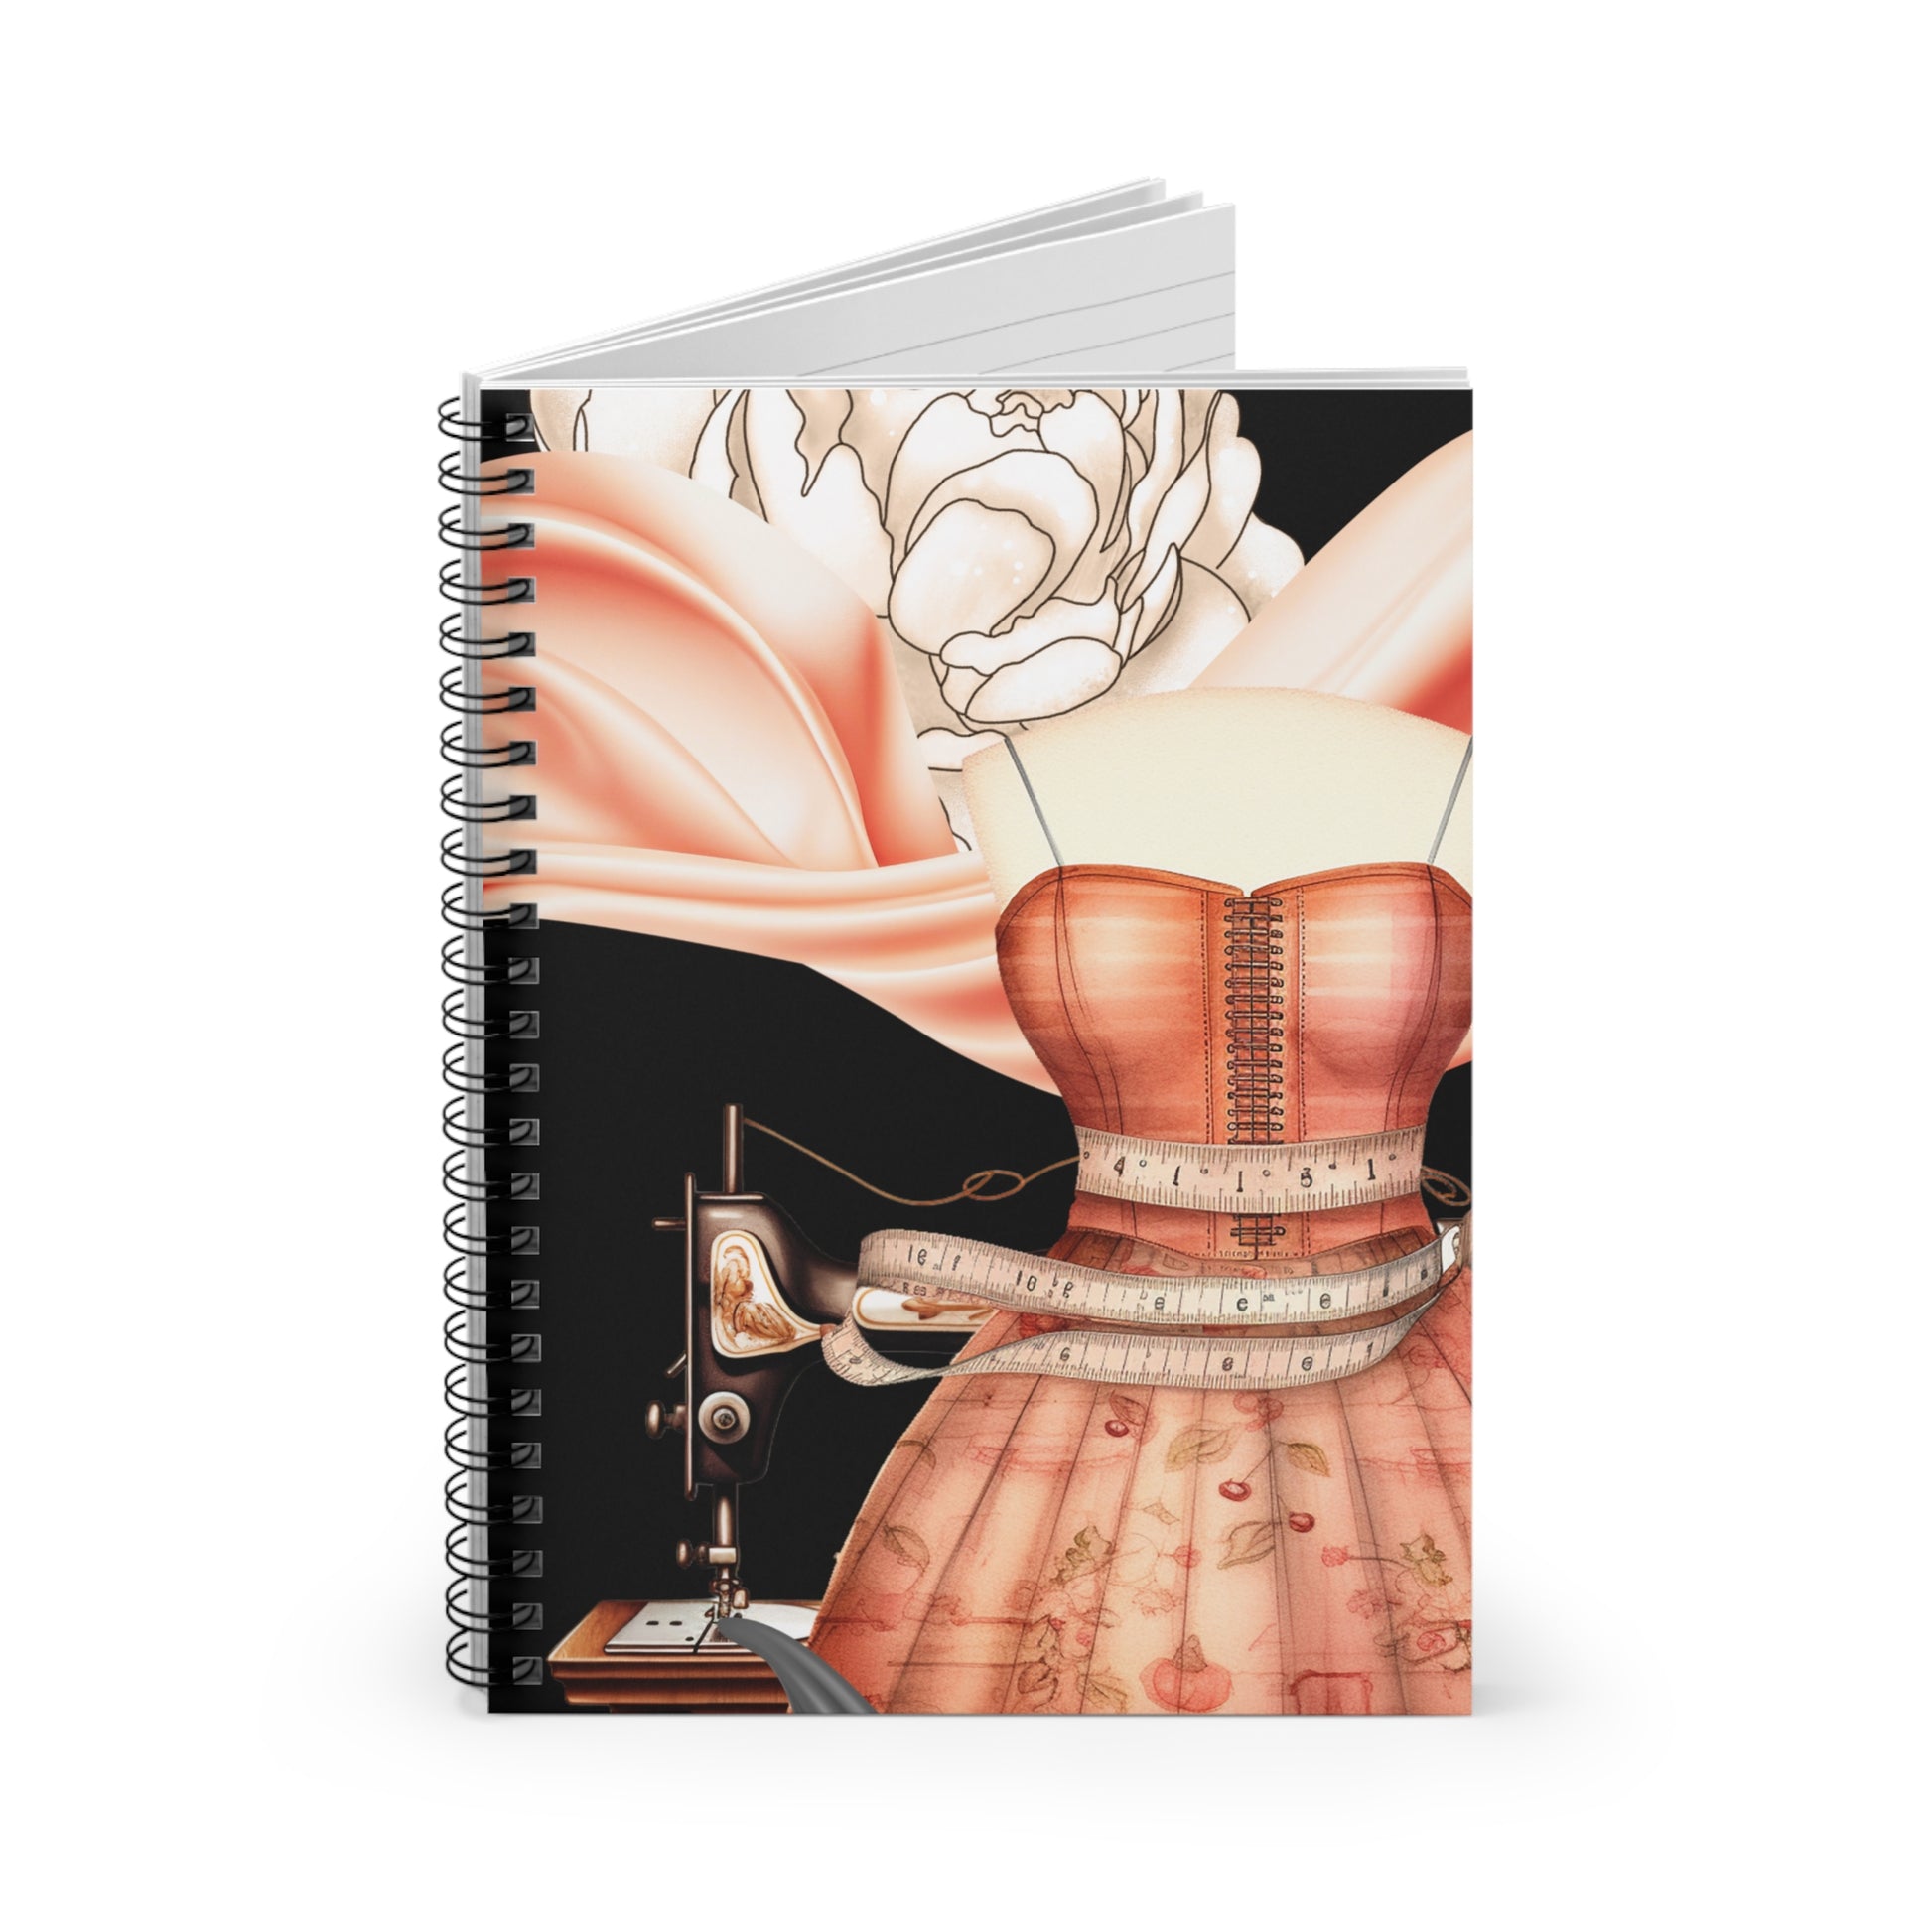 Measure Twice: Spiral Notebook - Log Books - Journals - Diaries - and More Custom Printed by TheGlassyLass